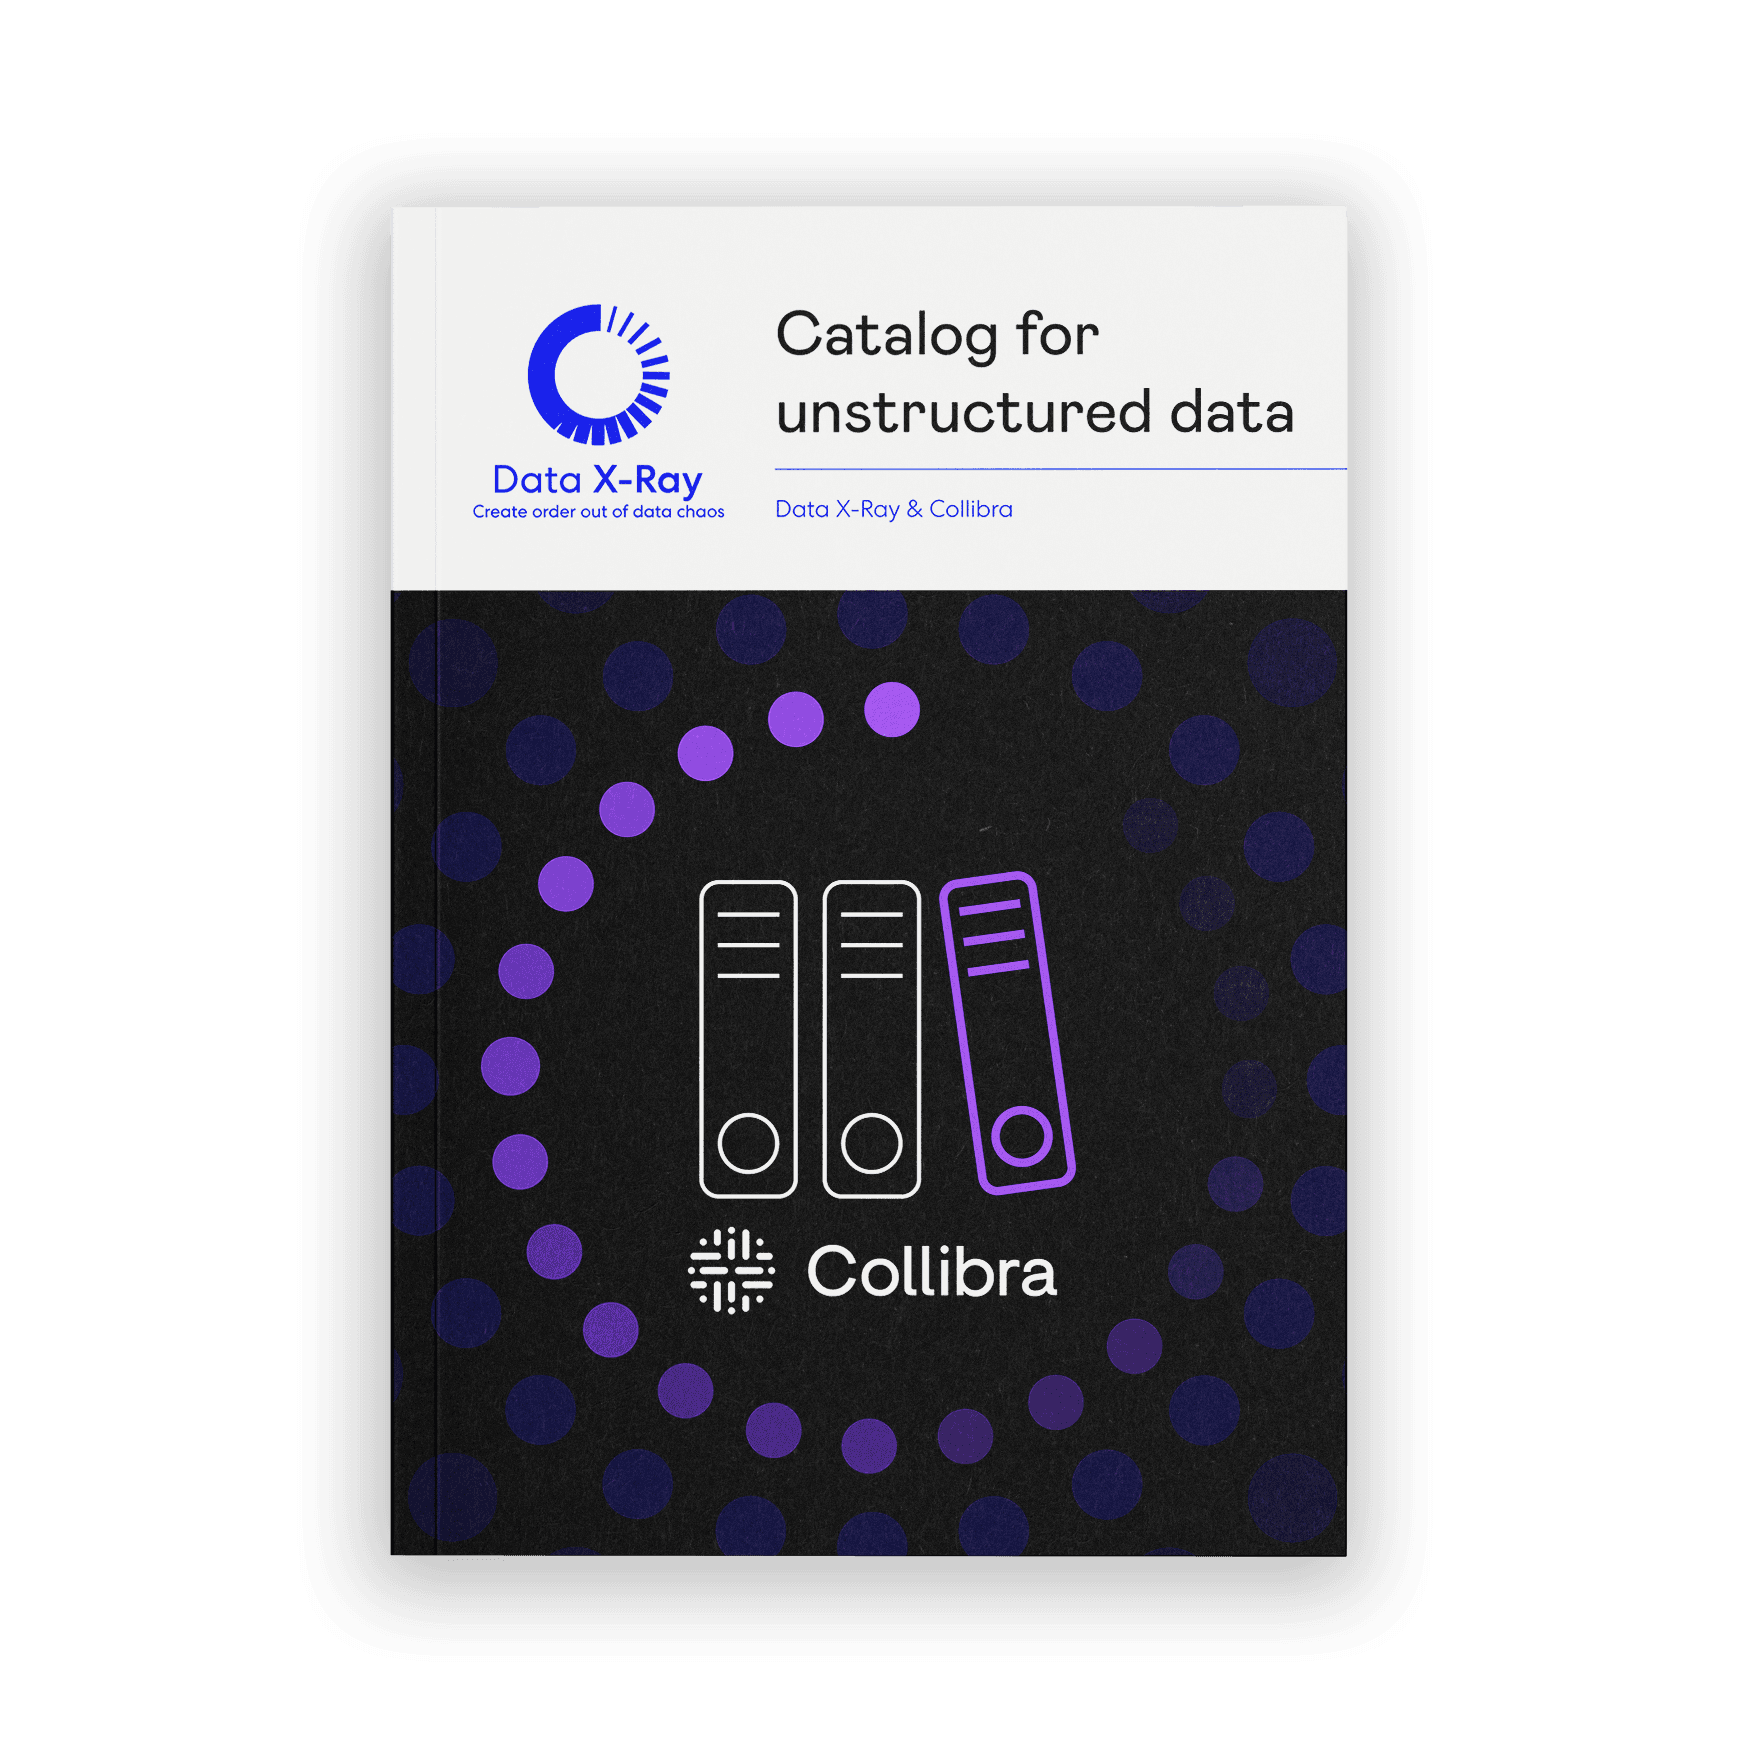 Power continuous unstructured data cataloging